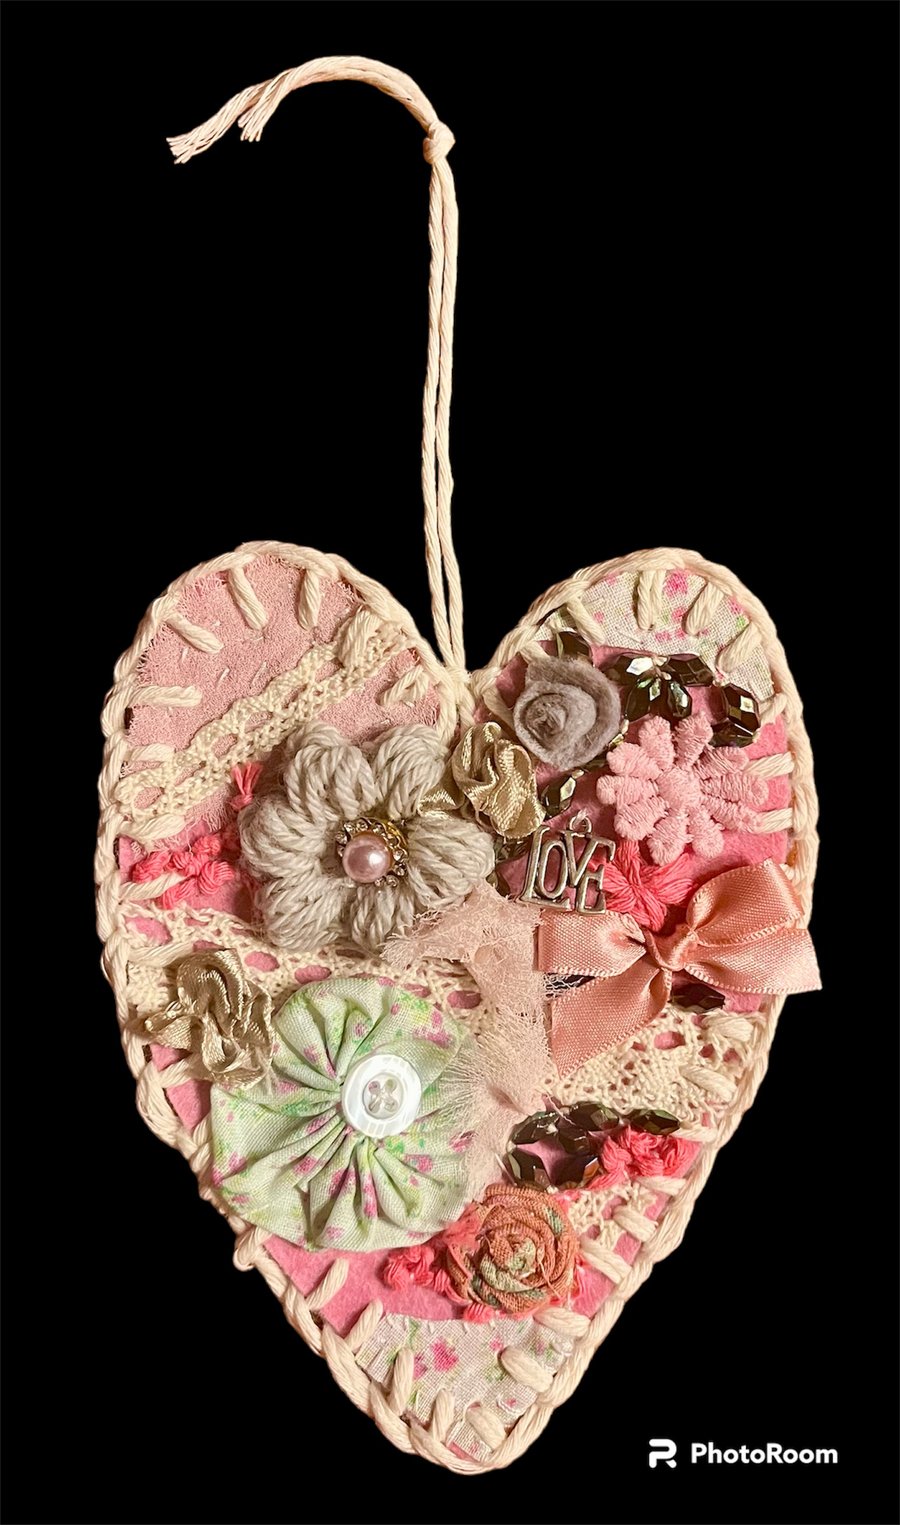 Hanging Heart with Gift Bag, Birthday, Mother’s Day, Love Heart, Thinking of You